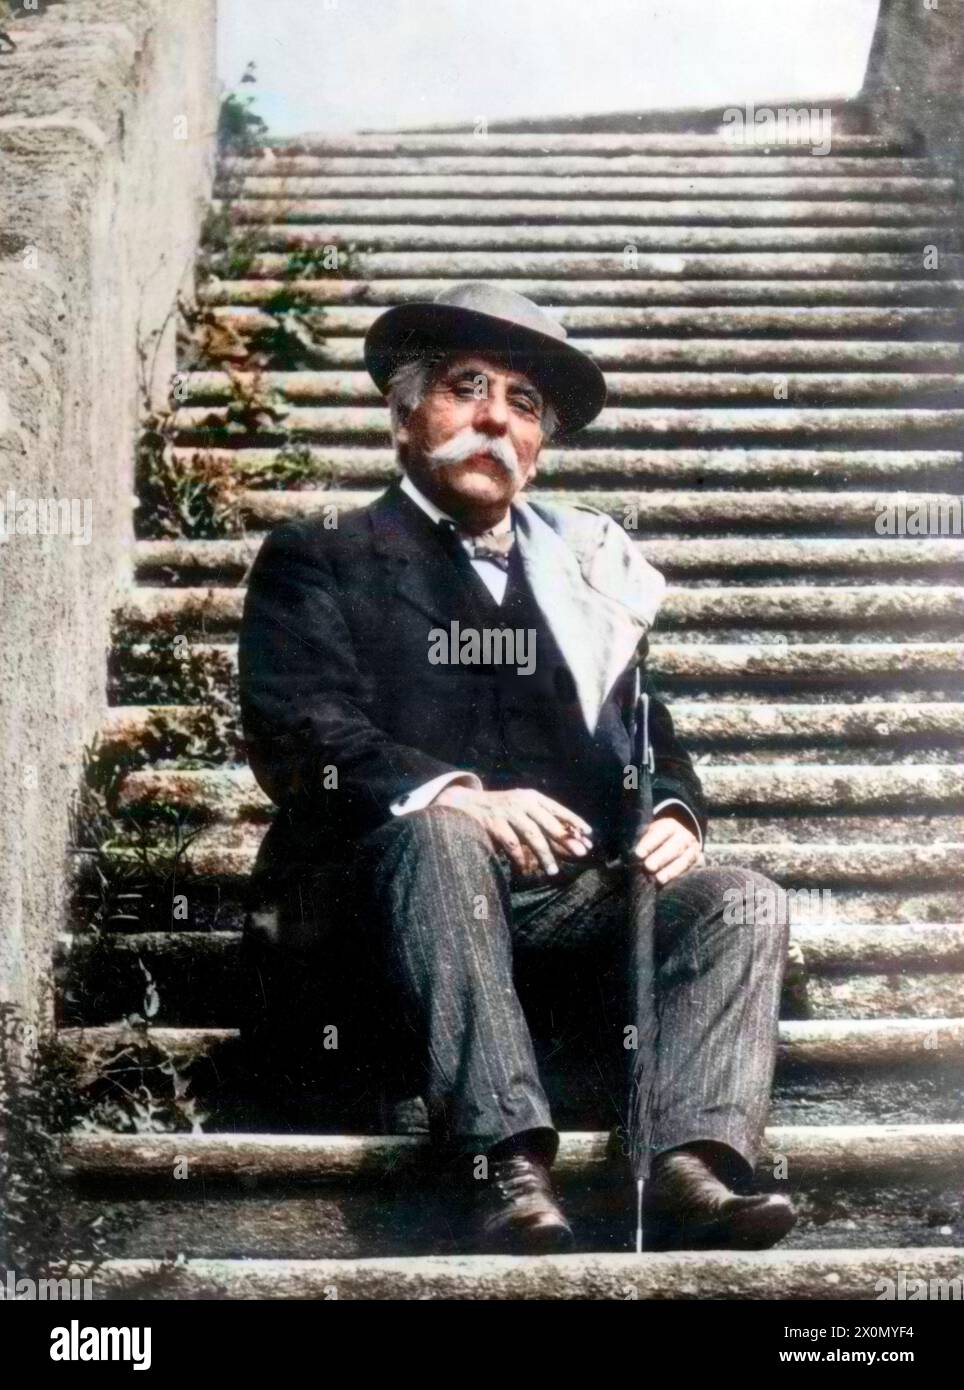 Gabriel Fauré seated on a staircase, cigarette in hand -  Later coloring. Digitally colourized image Stock Photo